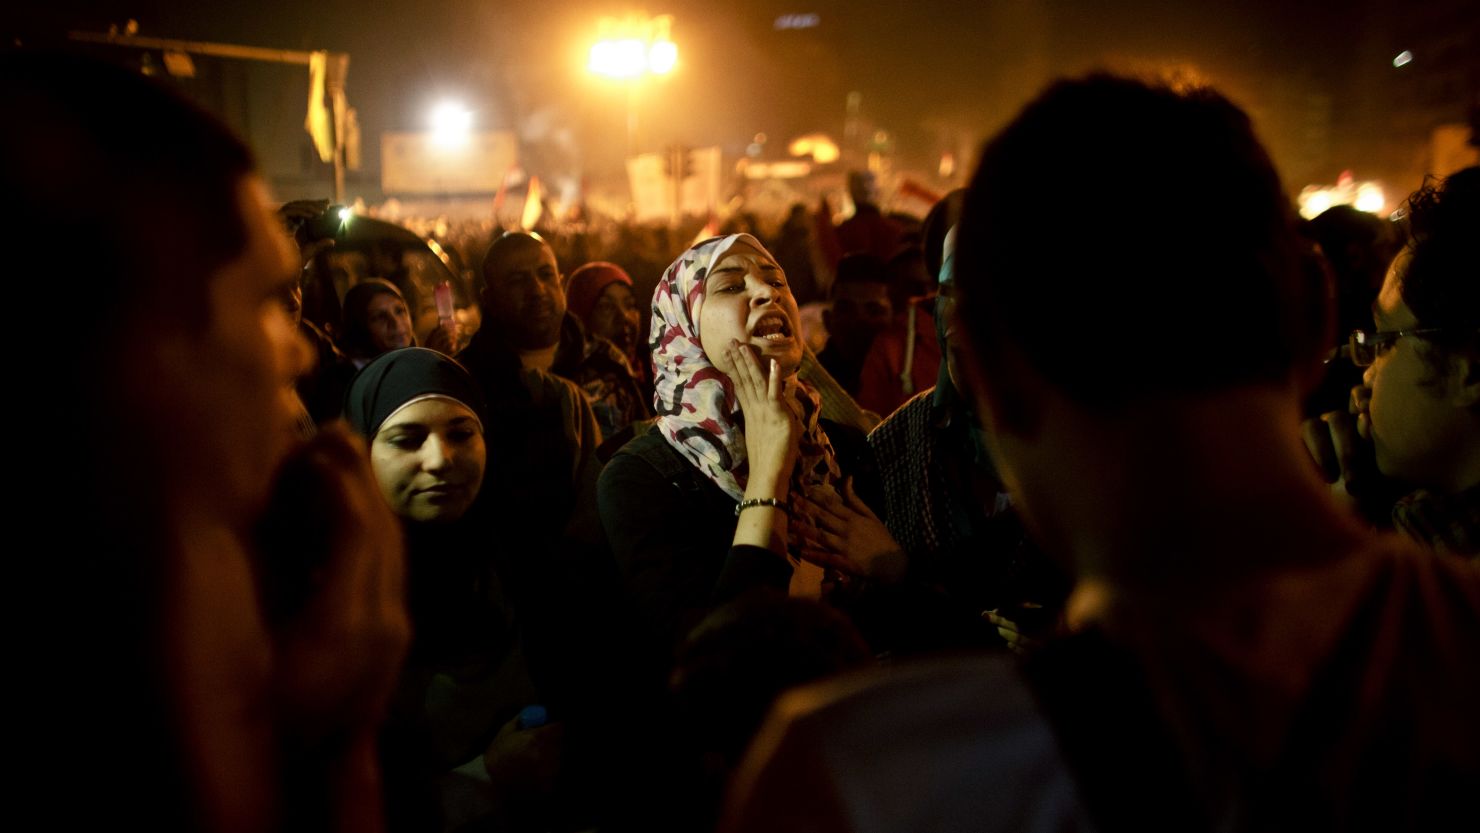 [File photo] An Egyptian woman chants slogans in Tahrir Square in Cairo, Egypt on January 25, 2013.